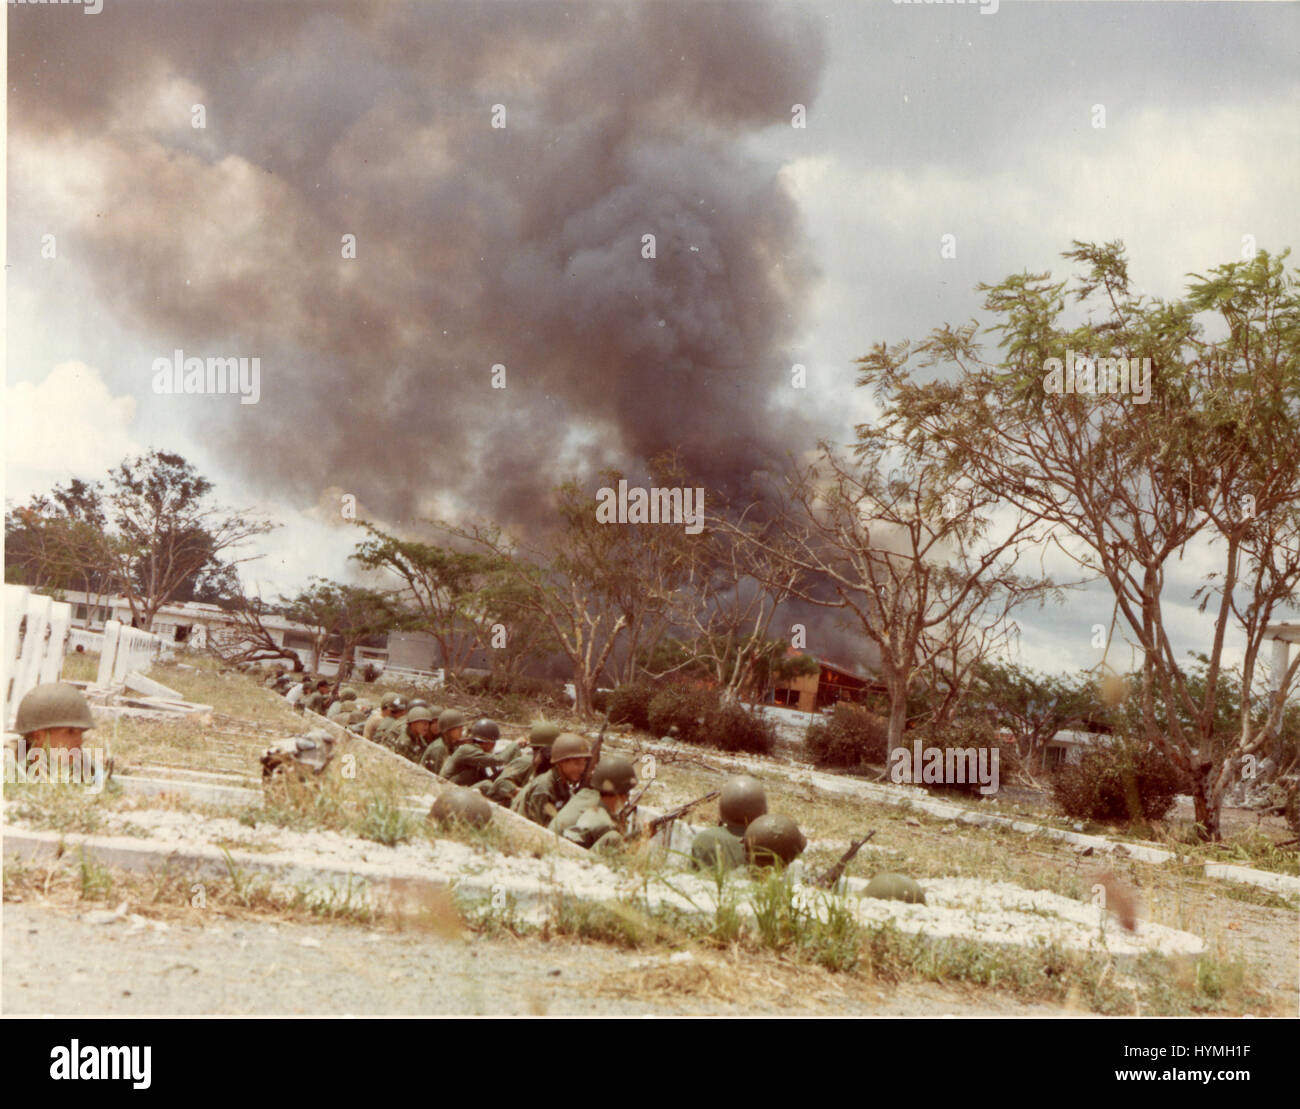 ARVN soldiers take cover in the old French Cemetery in Saigon during Tet. February 1, 1968. Stock Photo